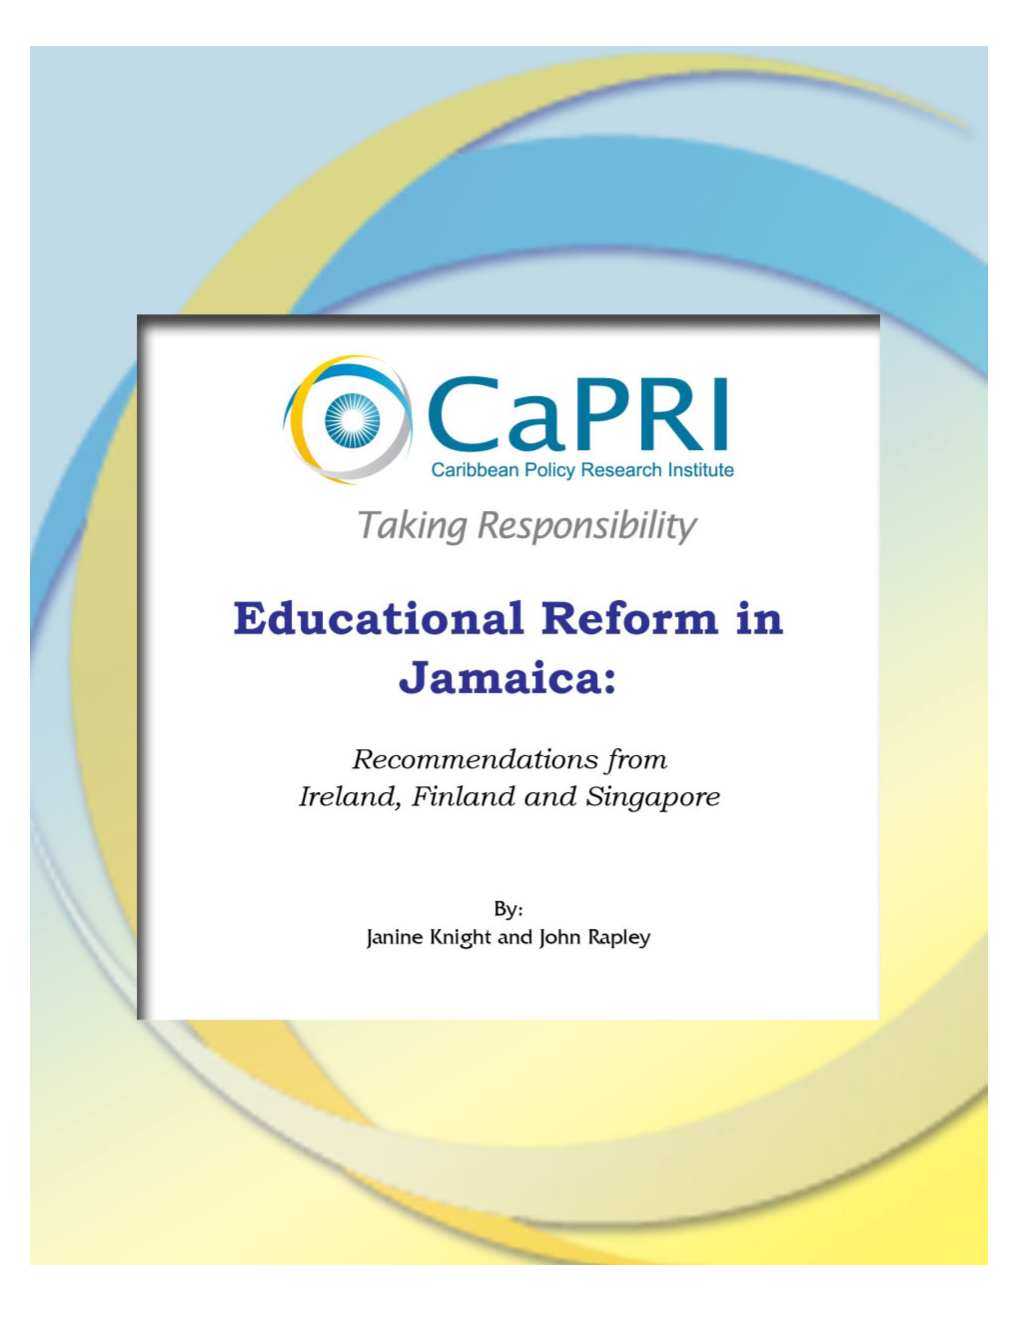 Educational Reform in Jamaica: Recommendations from Ireland, Finland and Singapore